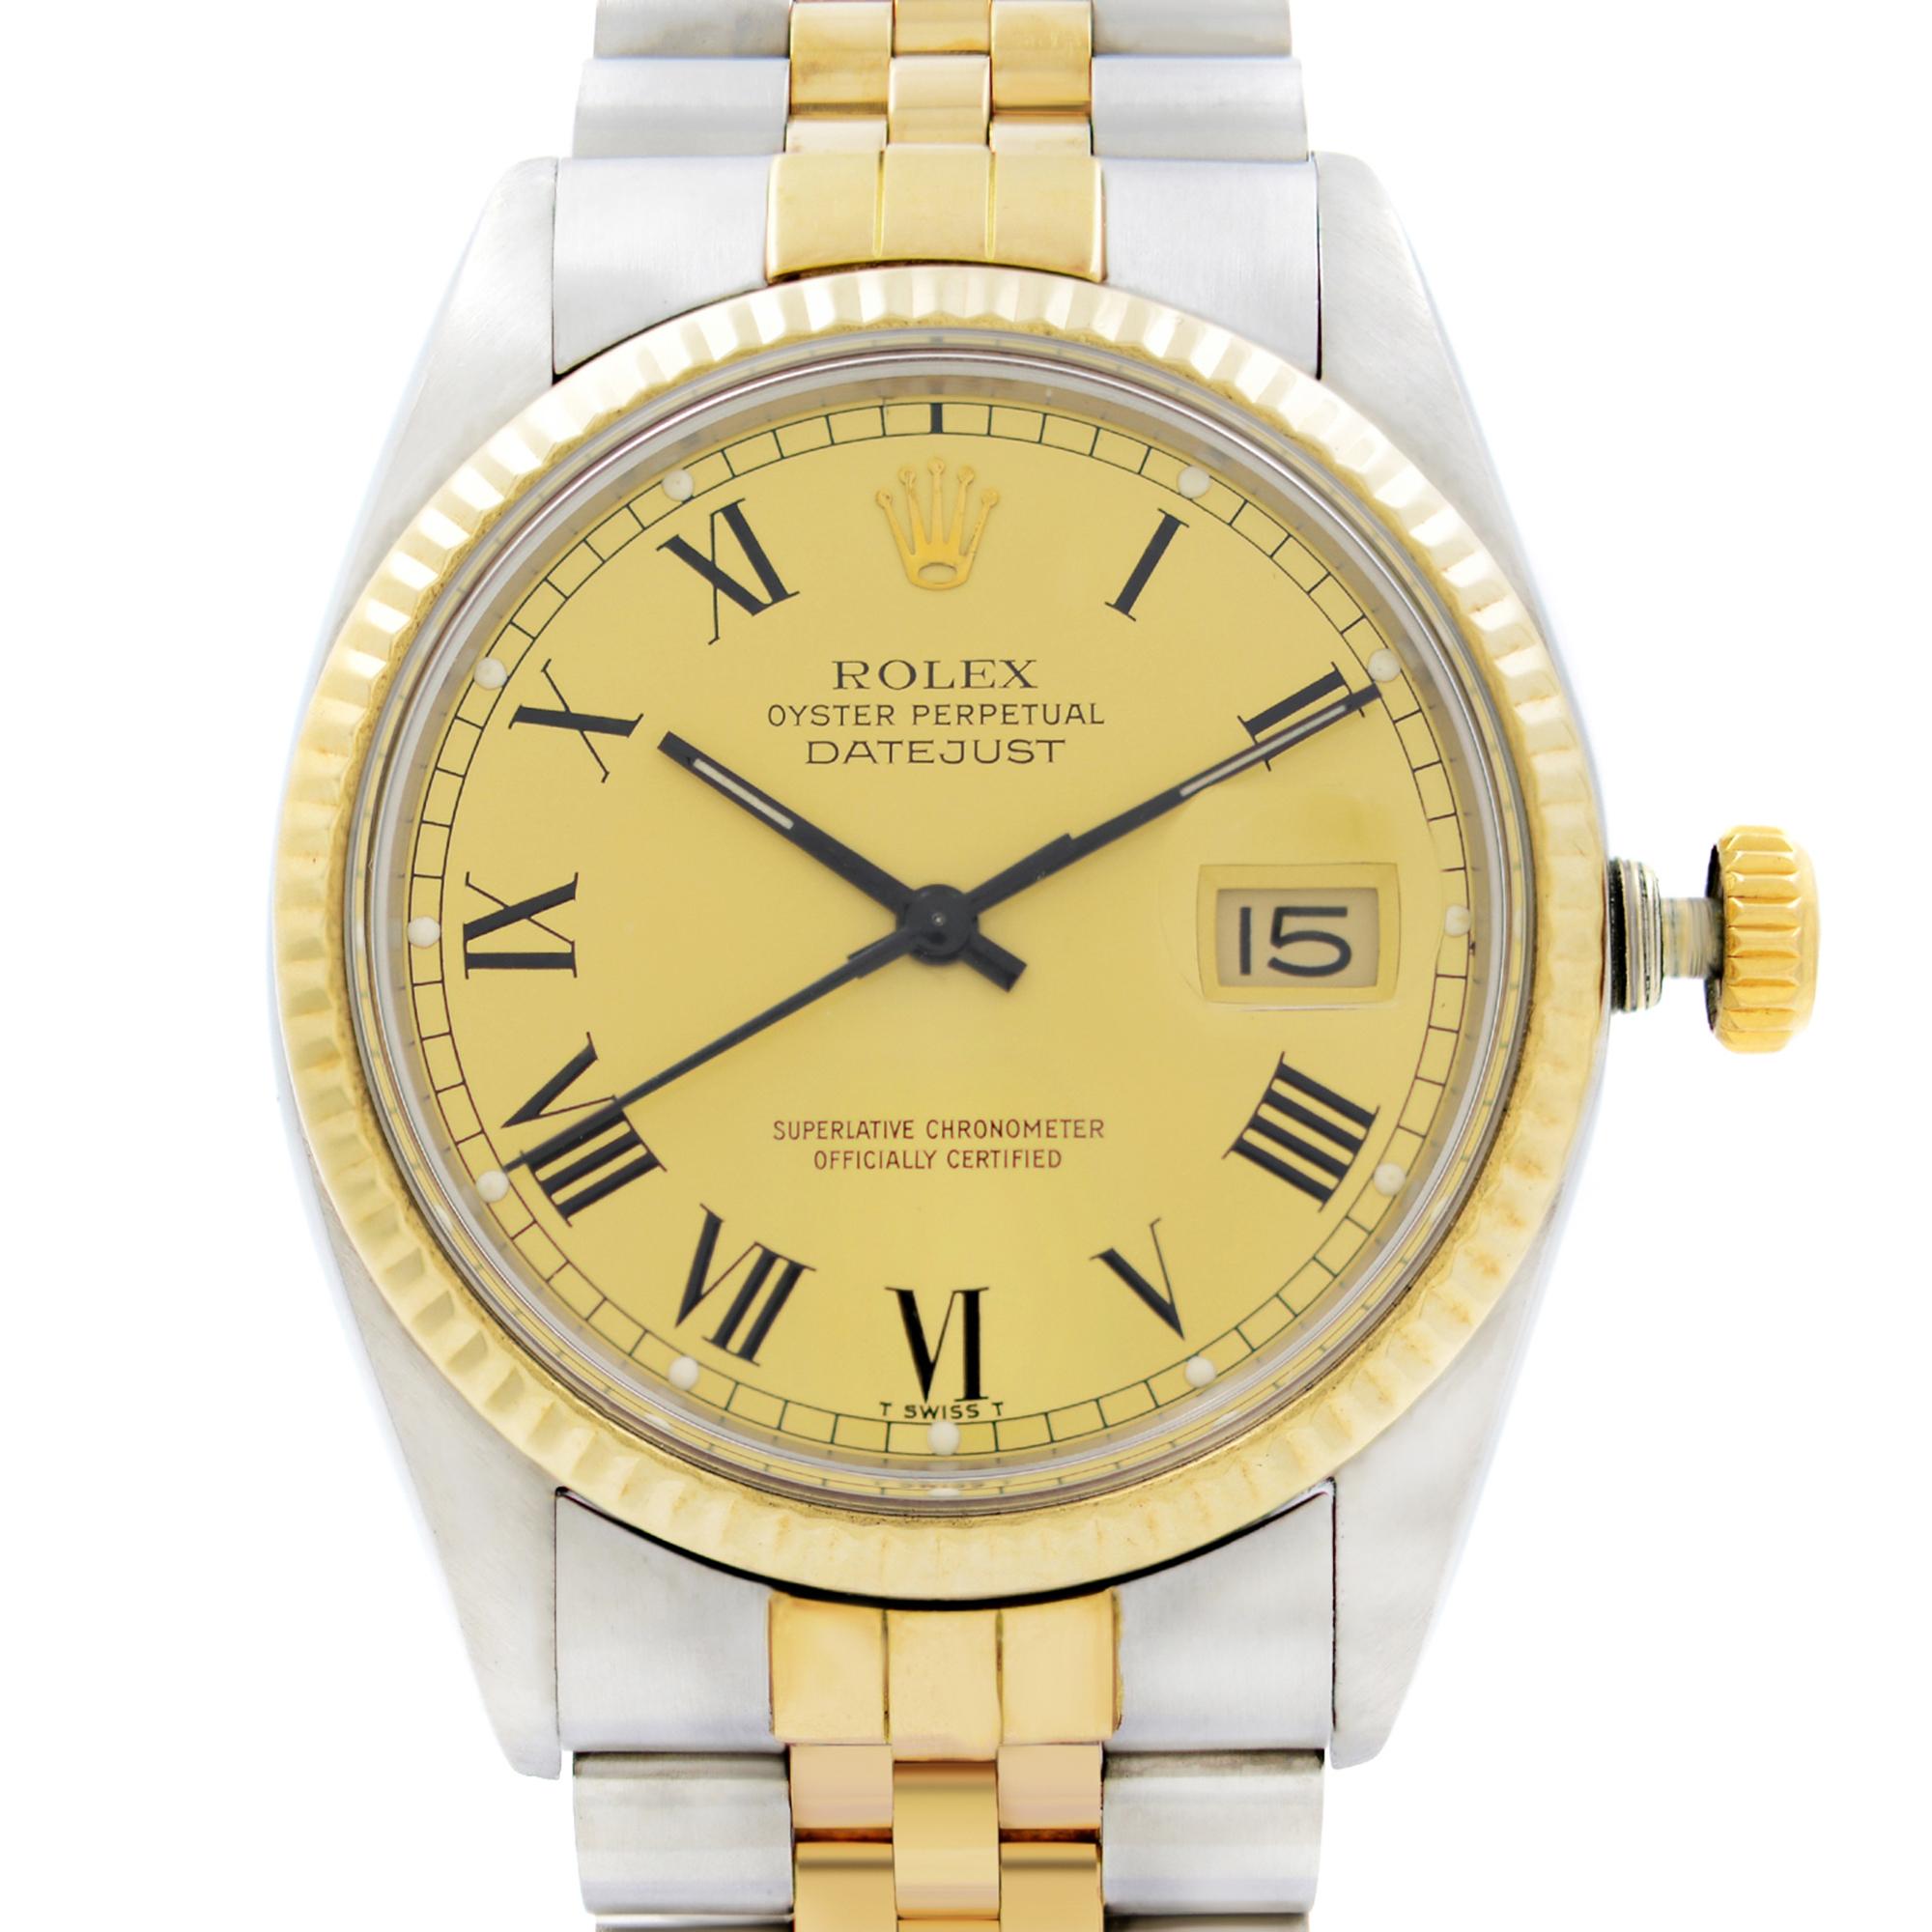 Pre-owned Rolex Datejust 18k Yellow Gold Champagne Dial Automatic Men's Watch. 